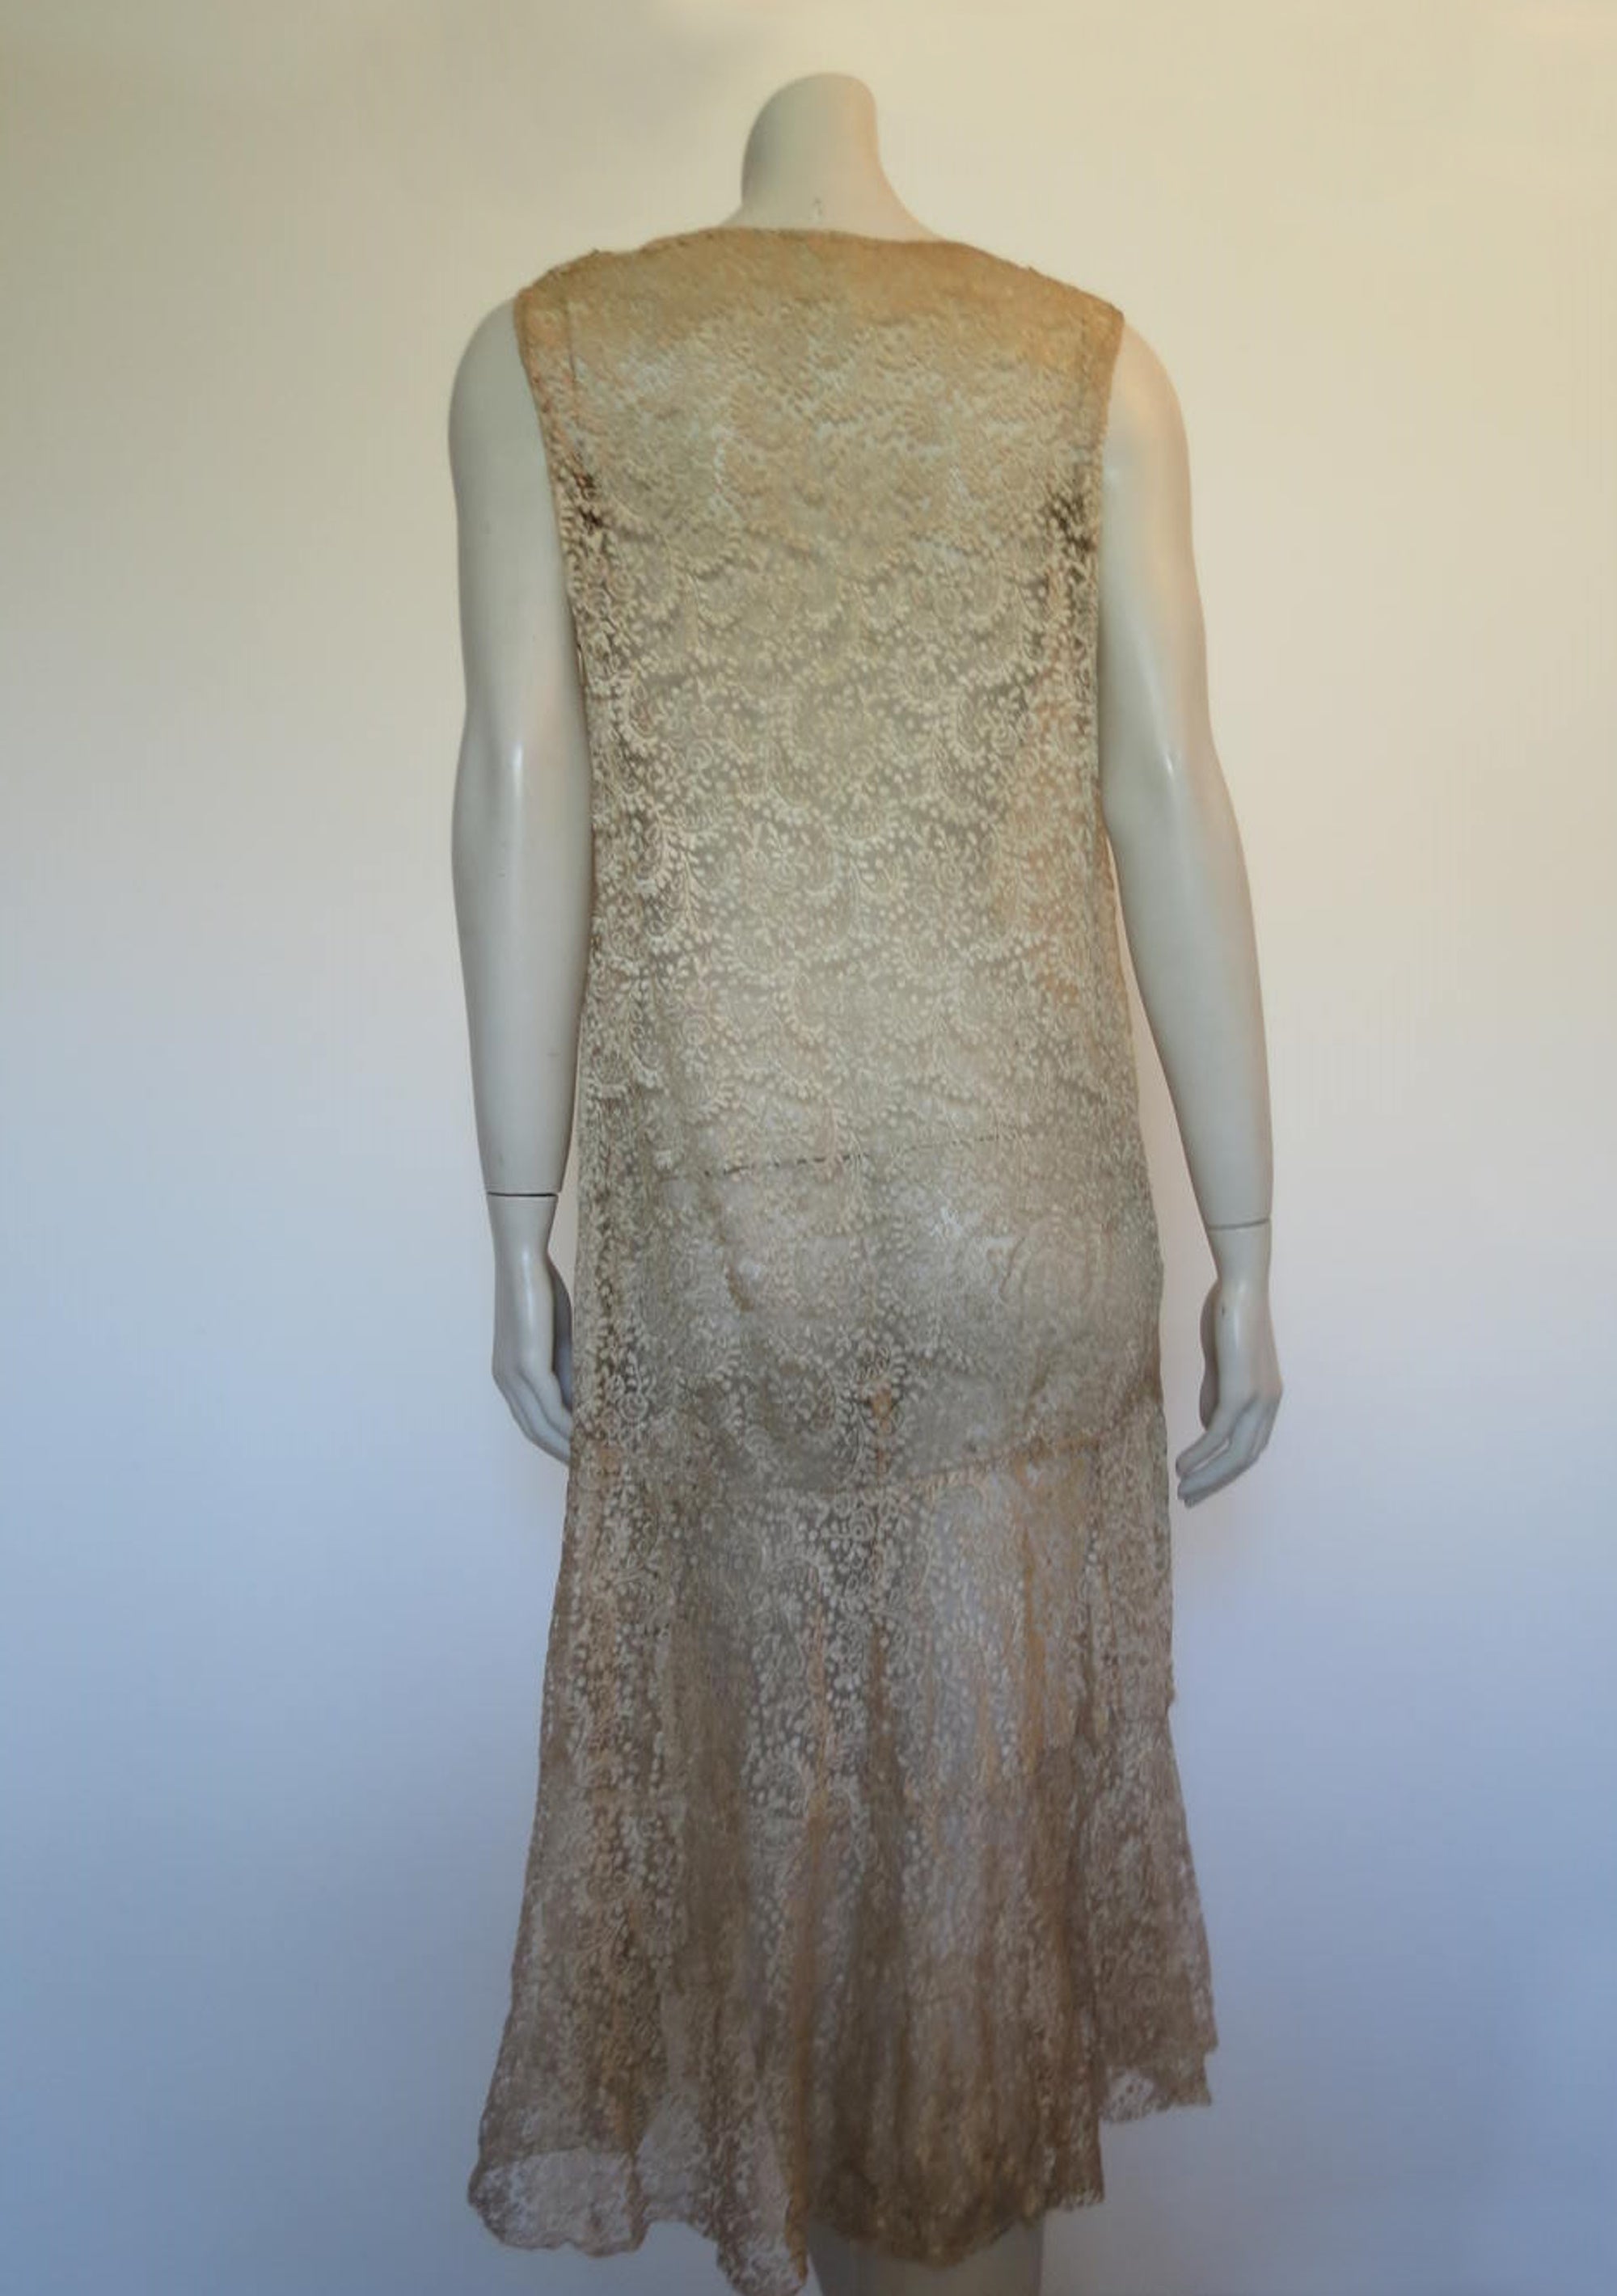 1920s vintage gold silk lace flapper dress and jacket for display only